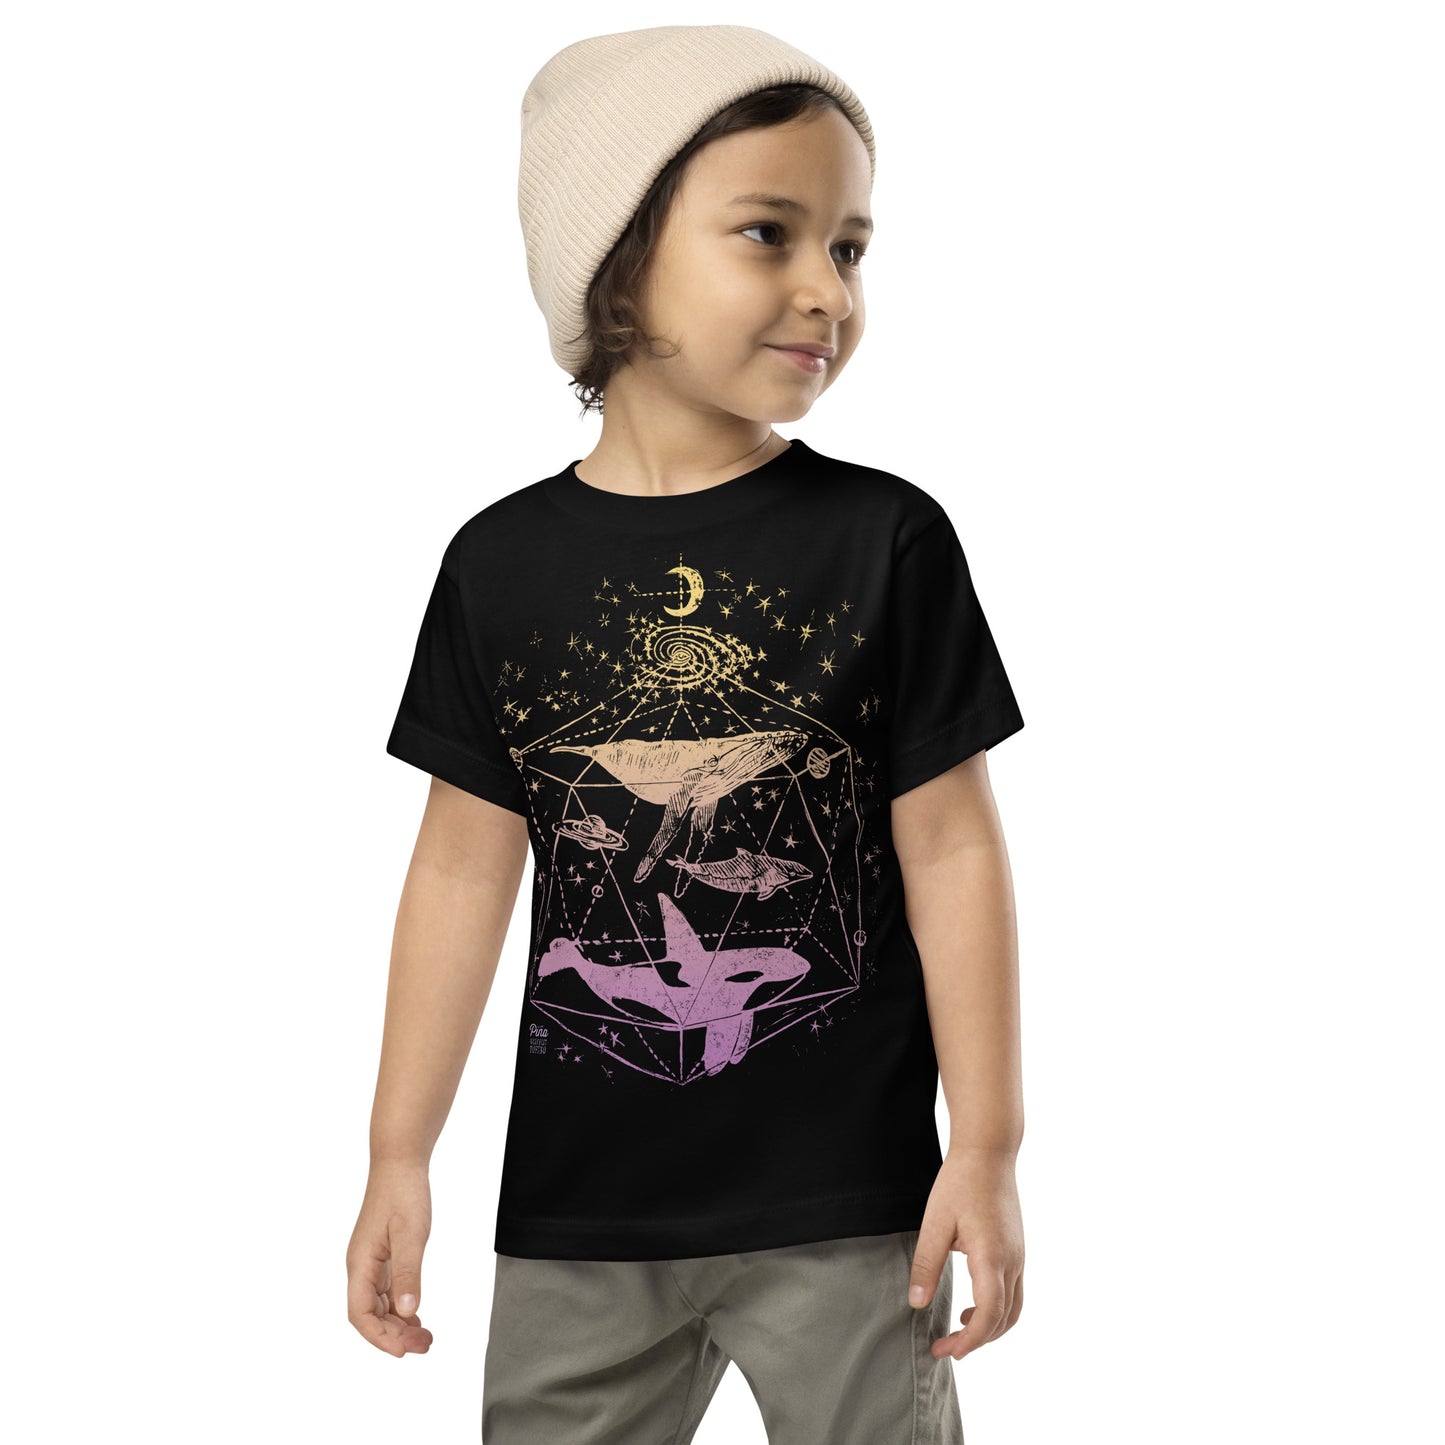 Galactic Whales Toddler Tee